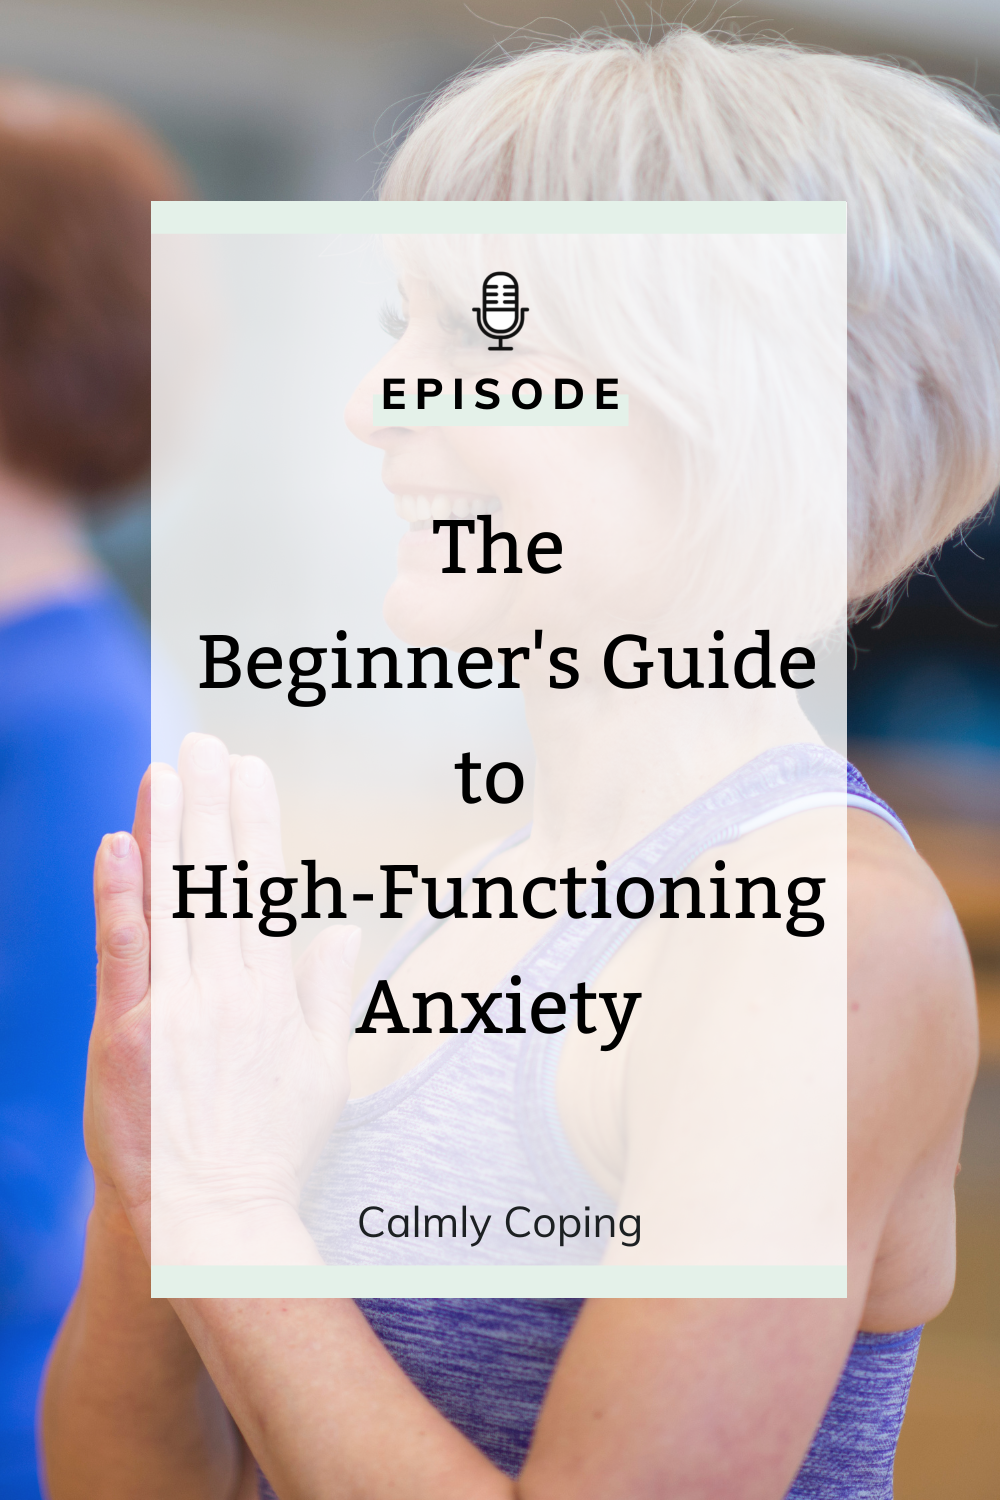 The Beginner's Guide to High-Functioning Anxiety